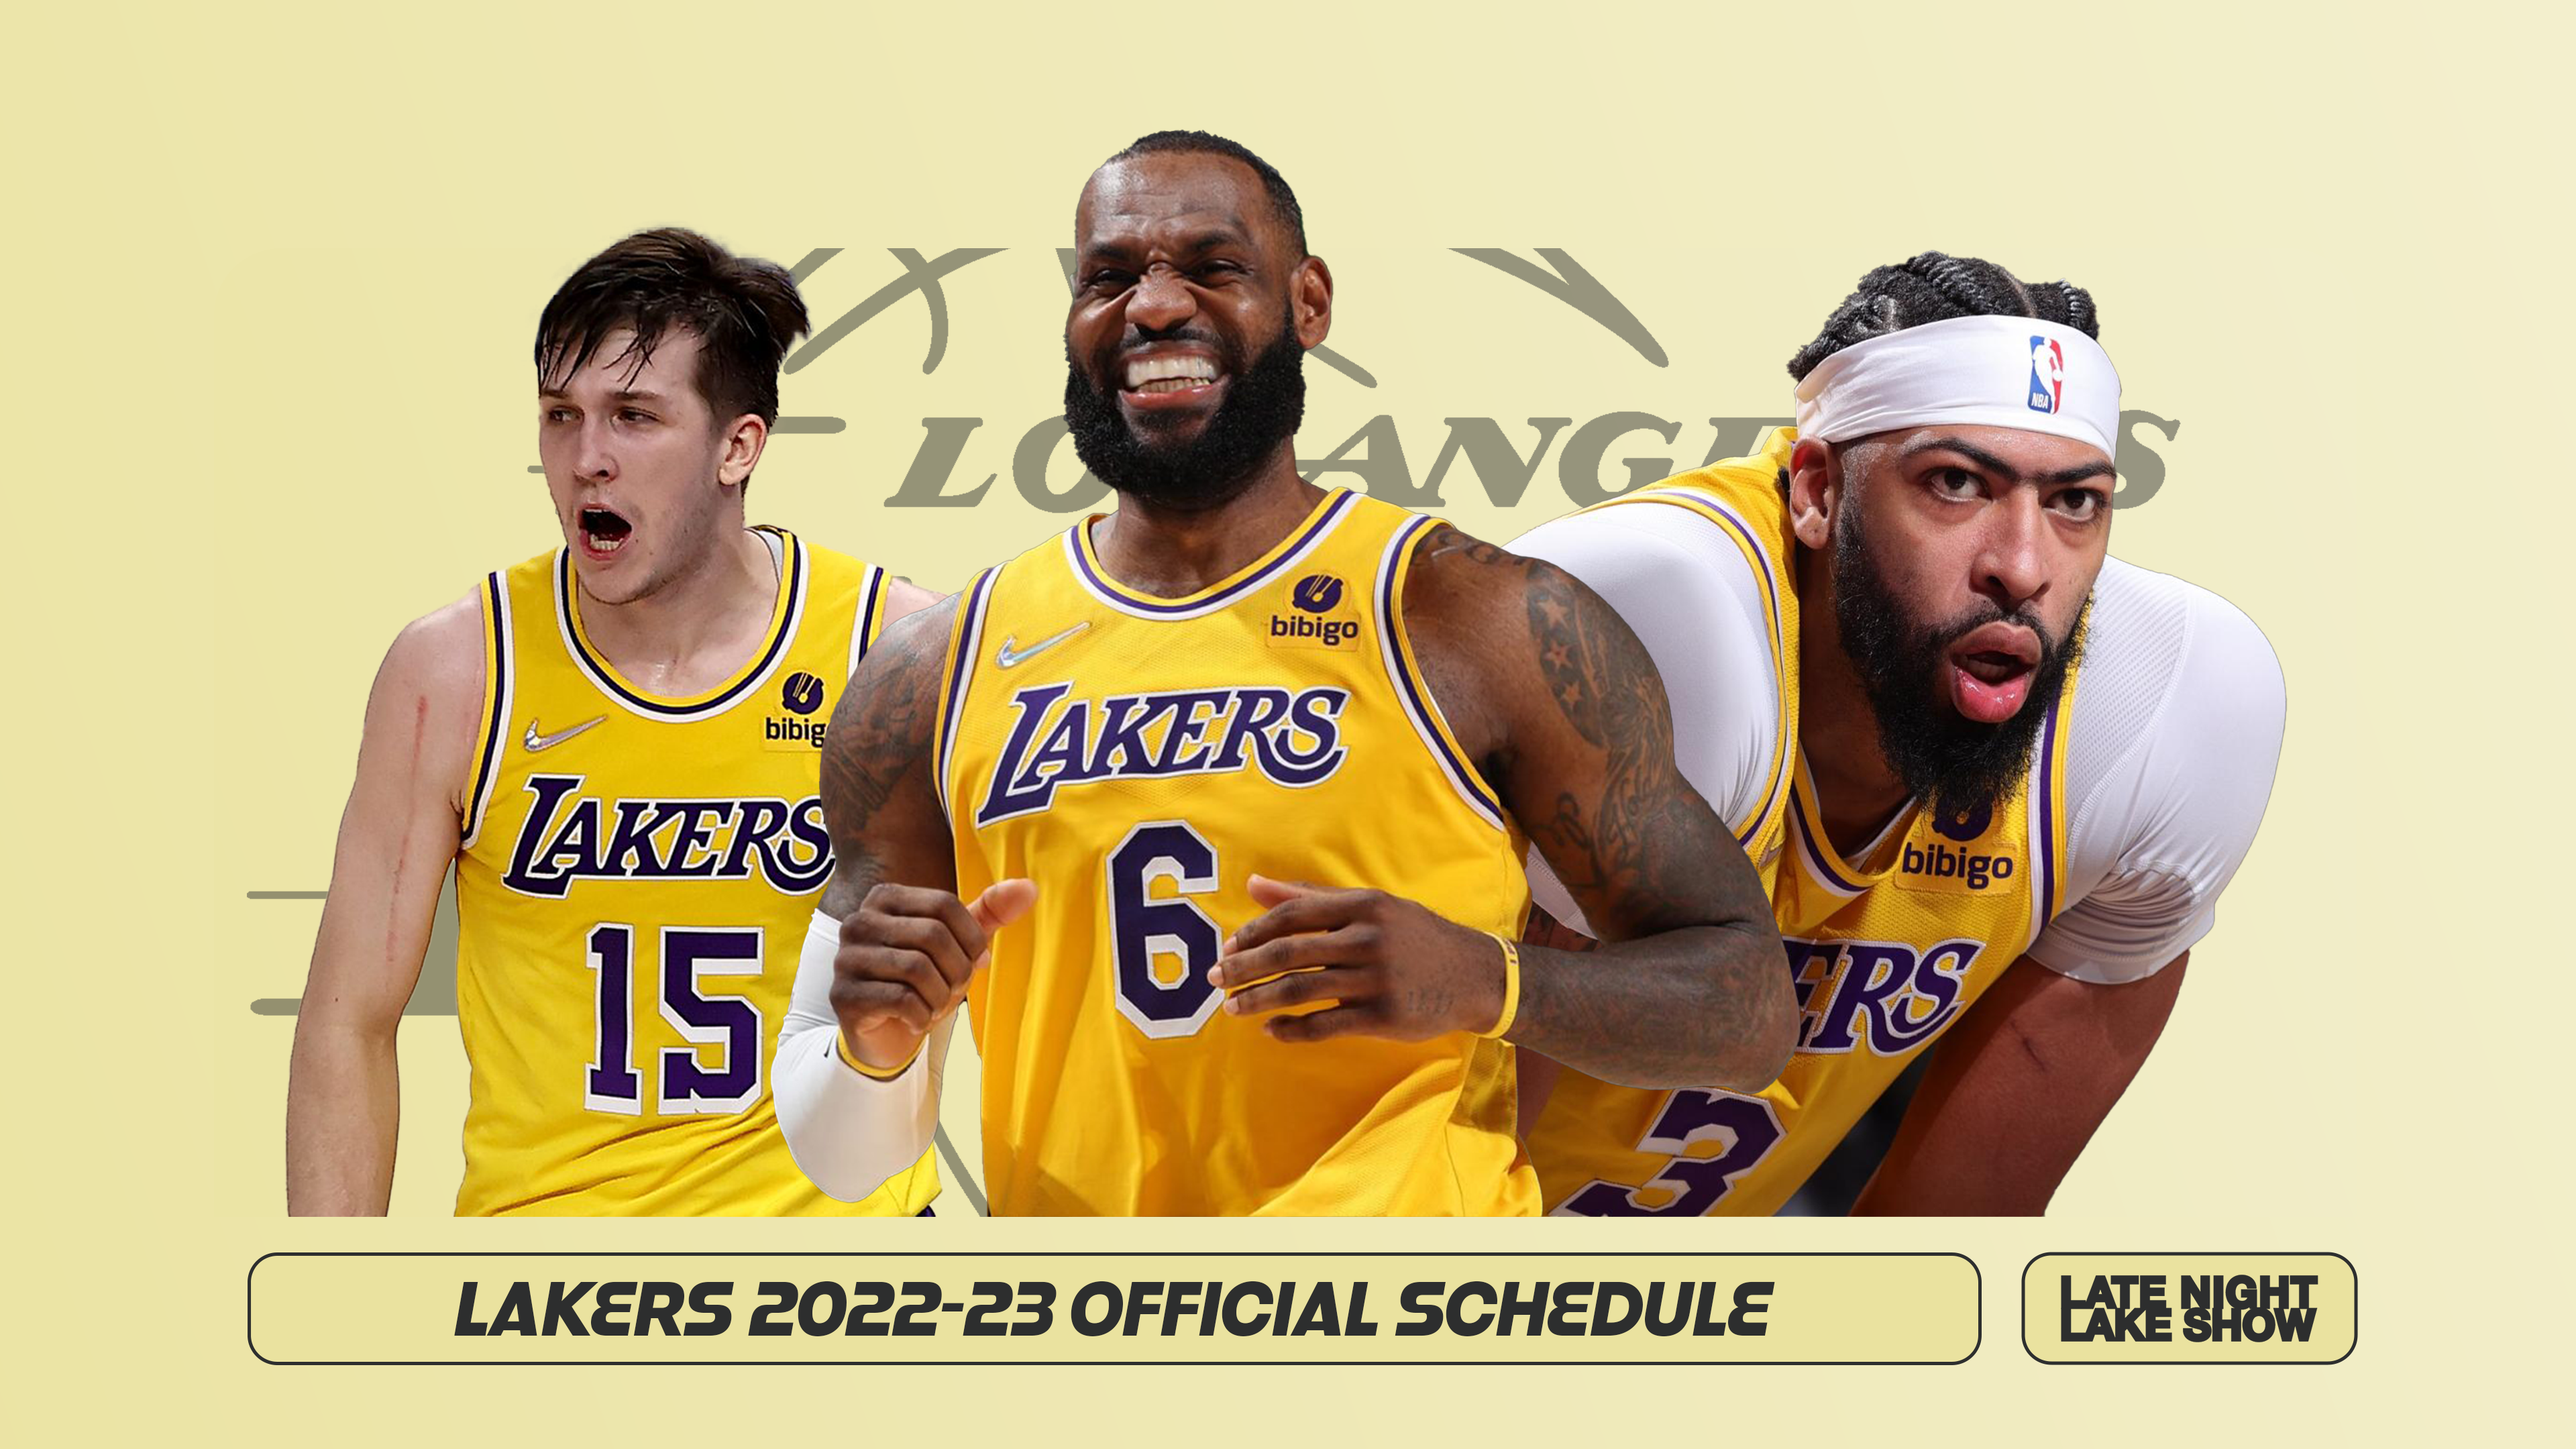 Lakers Schedule: Top 10 Must-See LA Games For the 2022-23 Regular